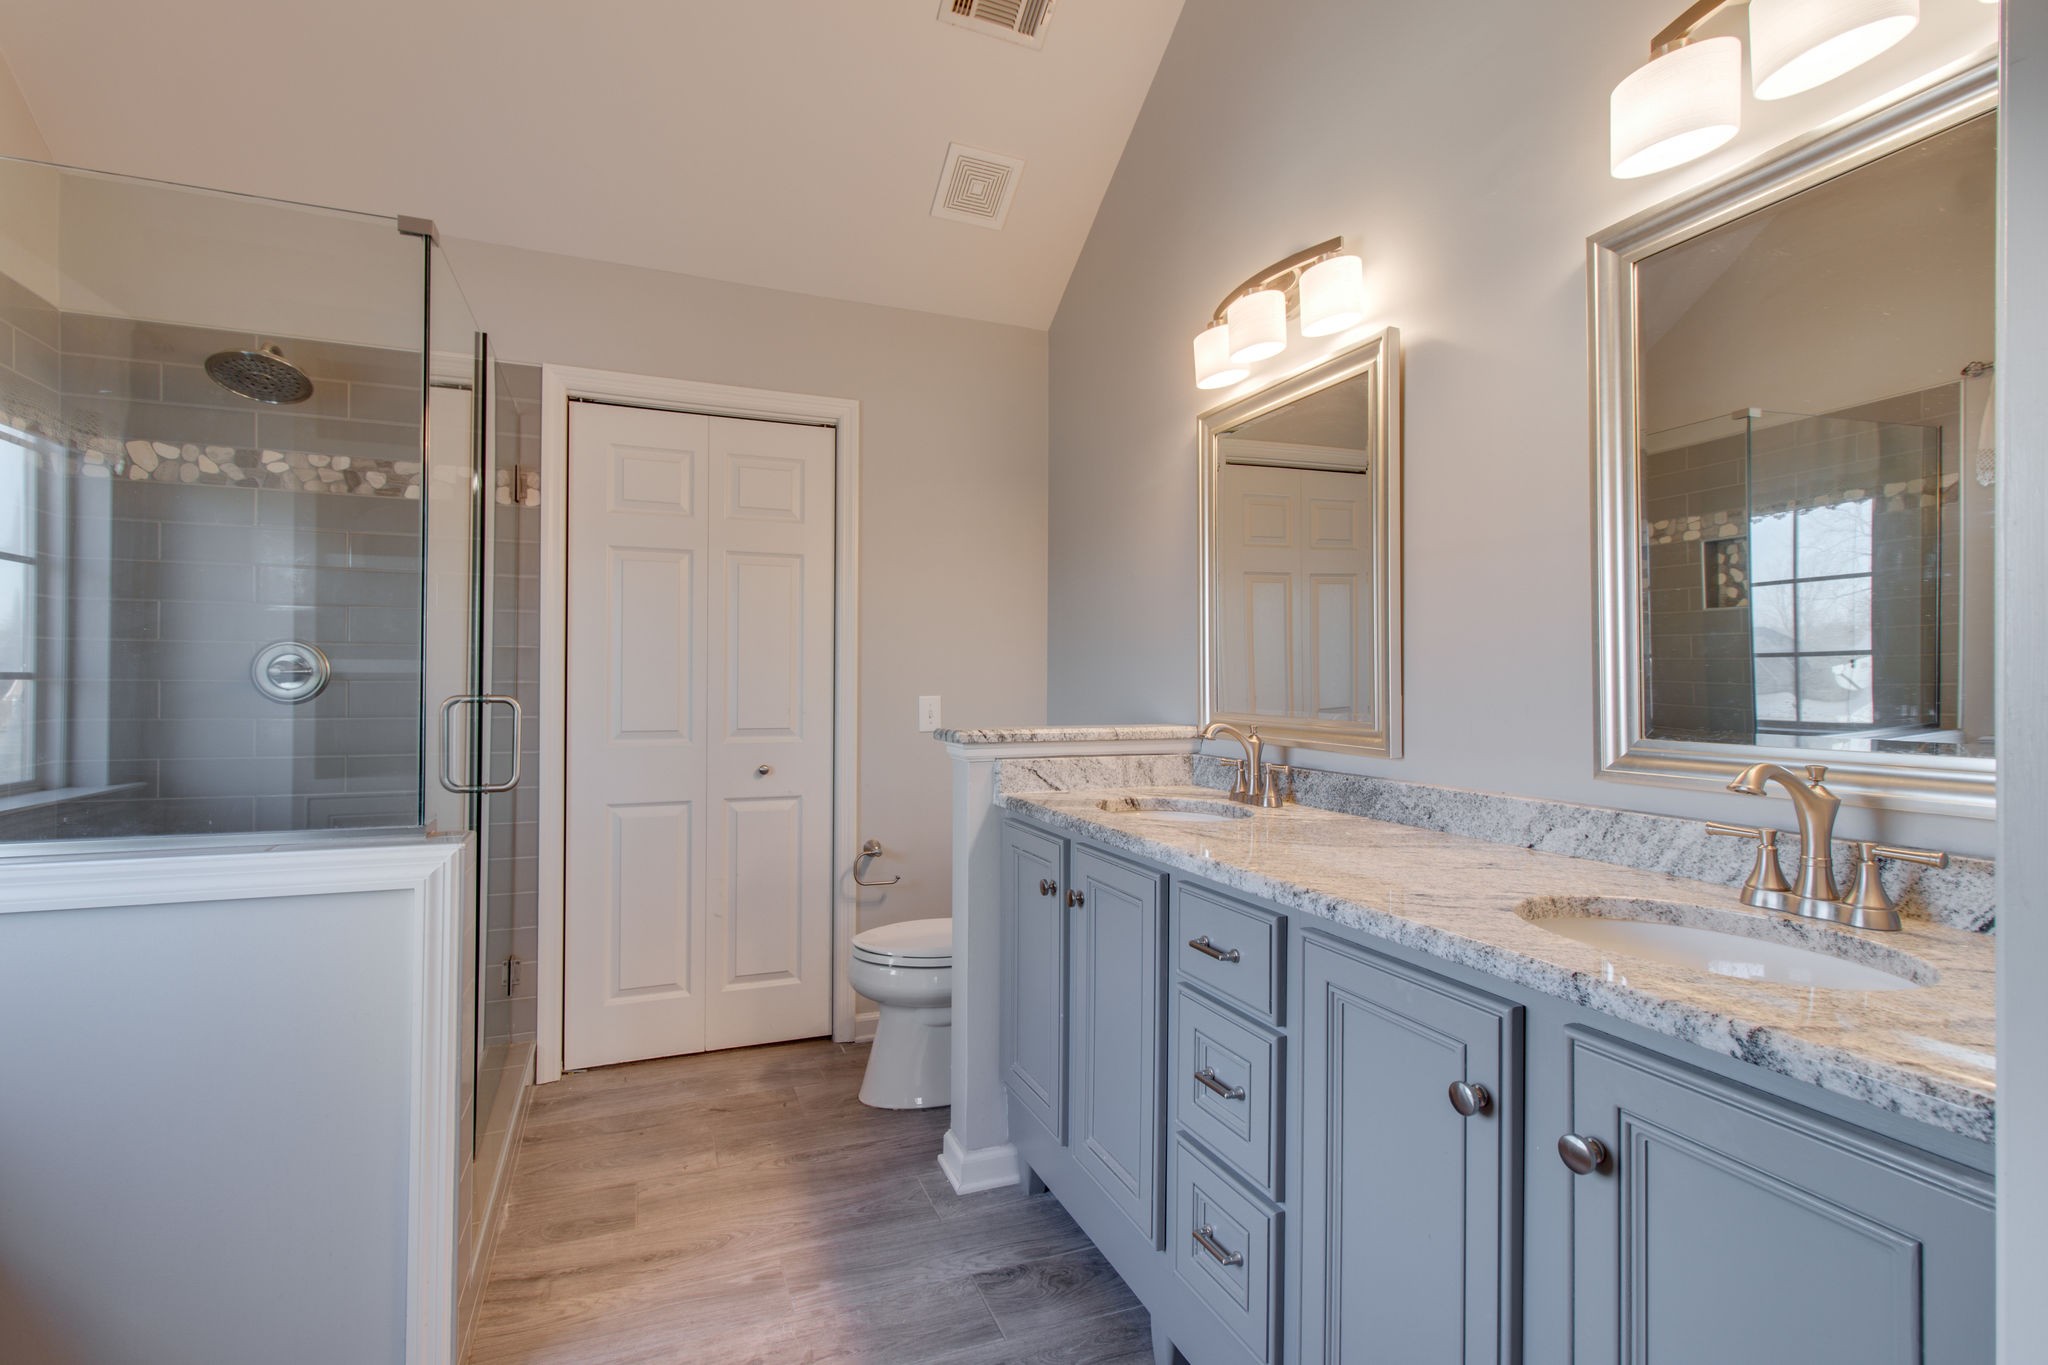 a bathroom with a granite countertop sink mirror and double